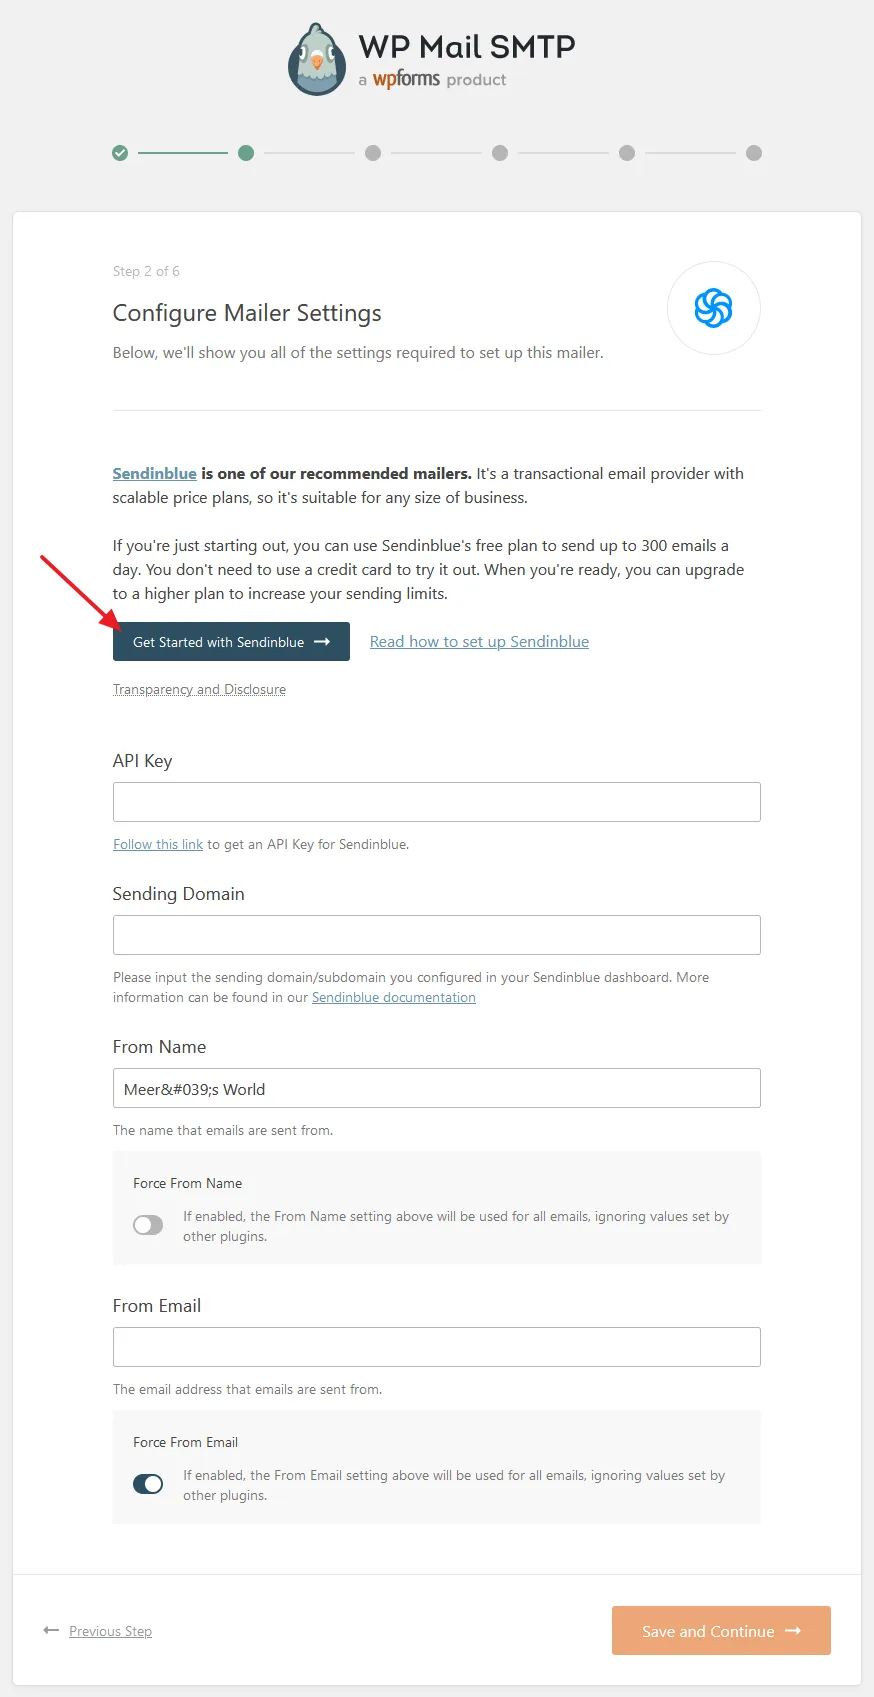 Click on the Get Started with Sendinblue button. 